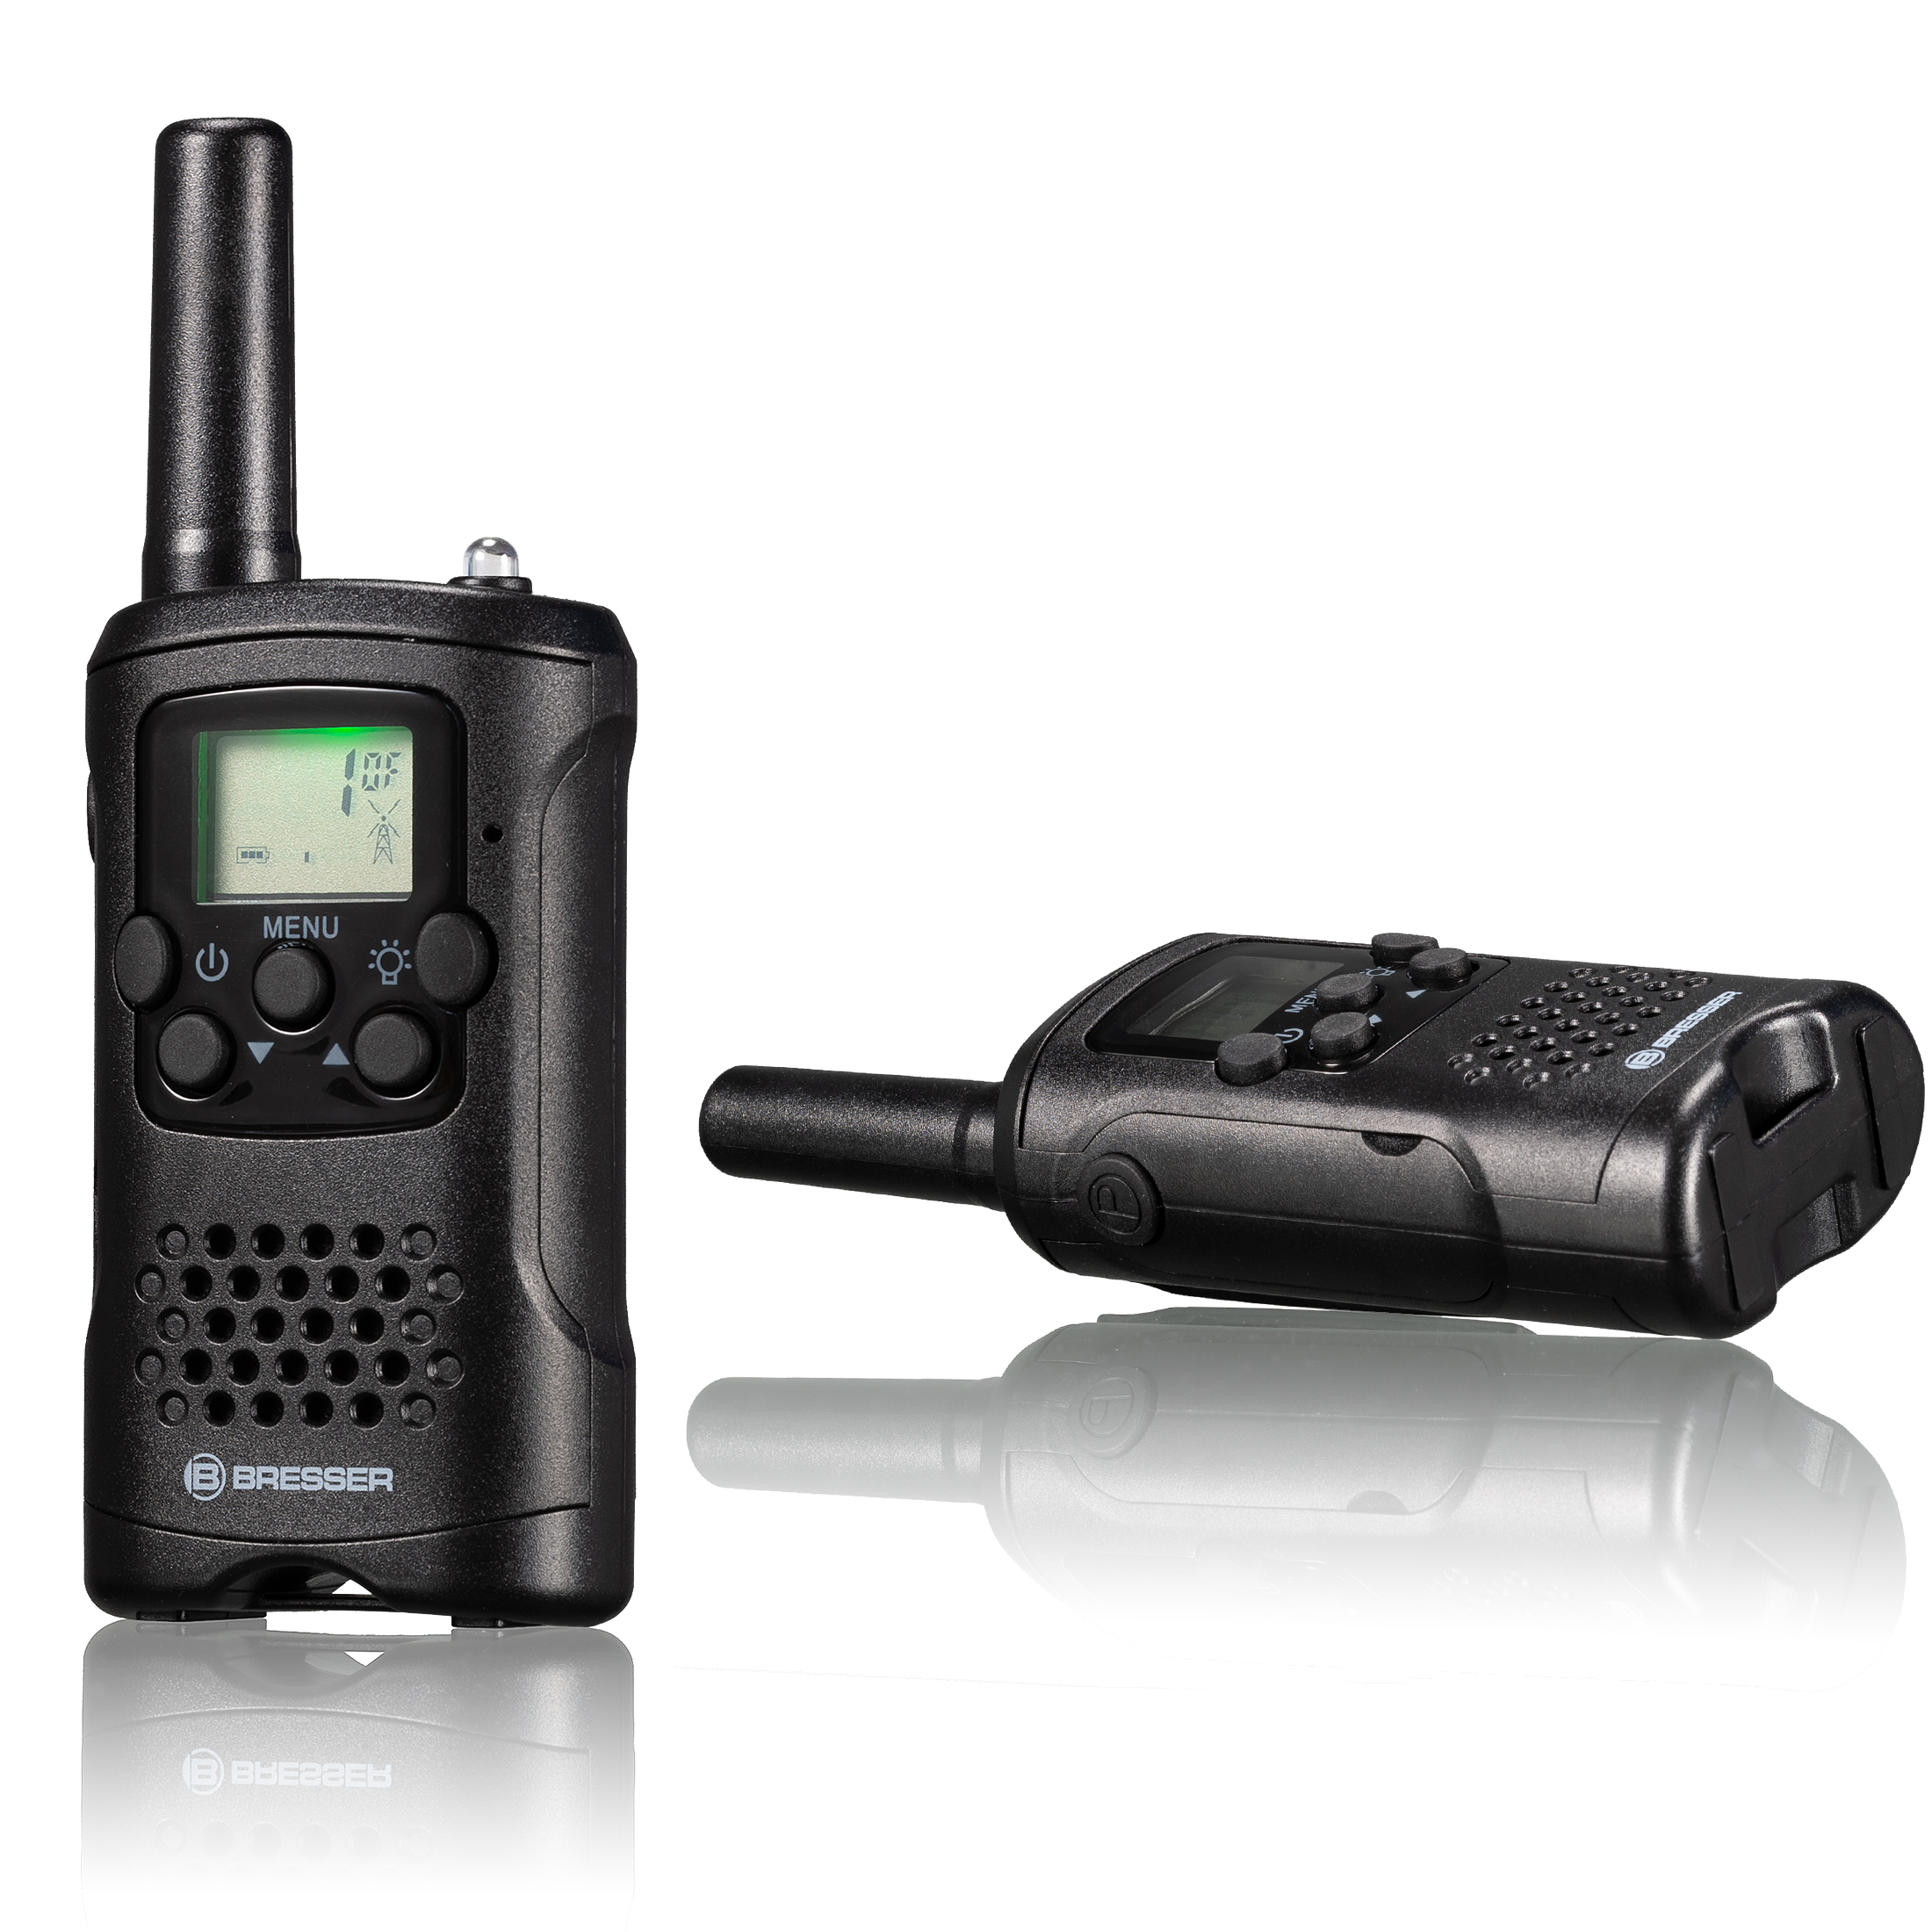 BRESSER FM Walkie Talkie 2piece Set with large range up to 6 km and free hand mode